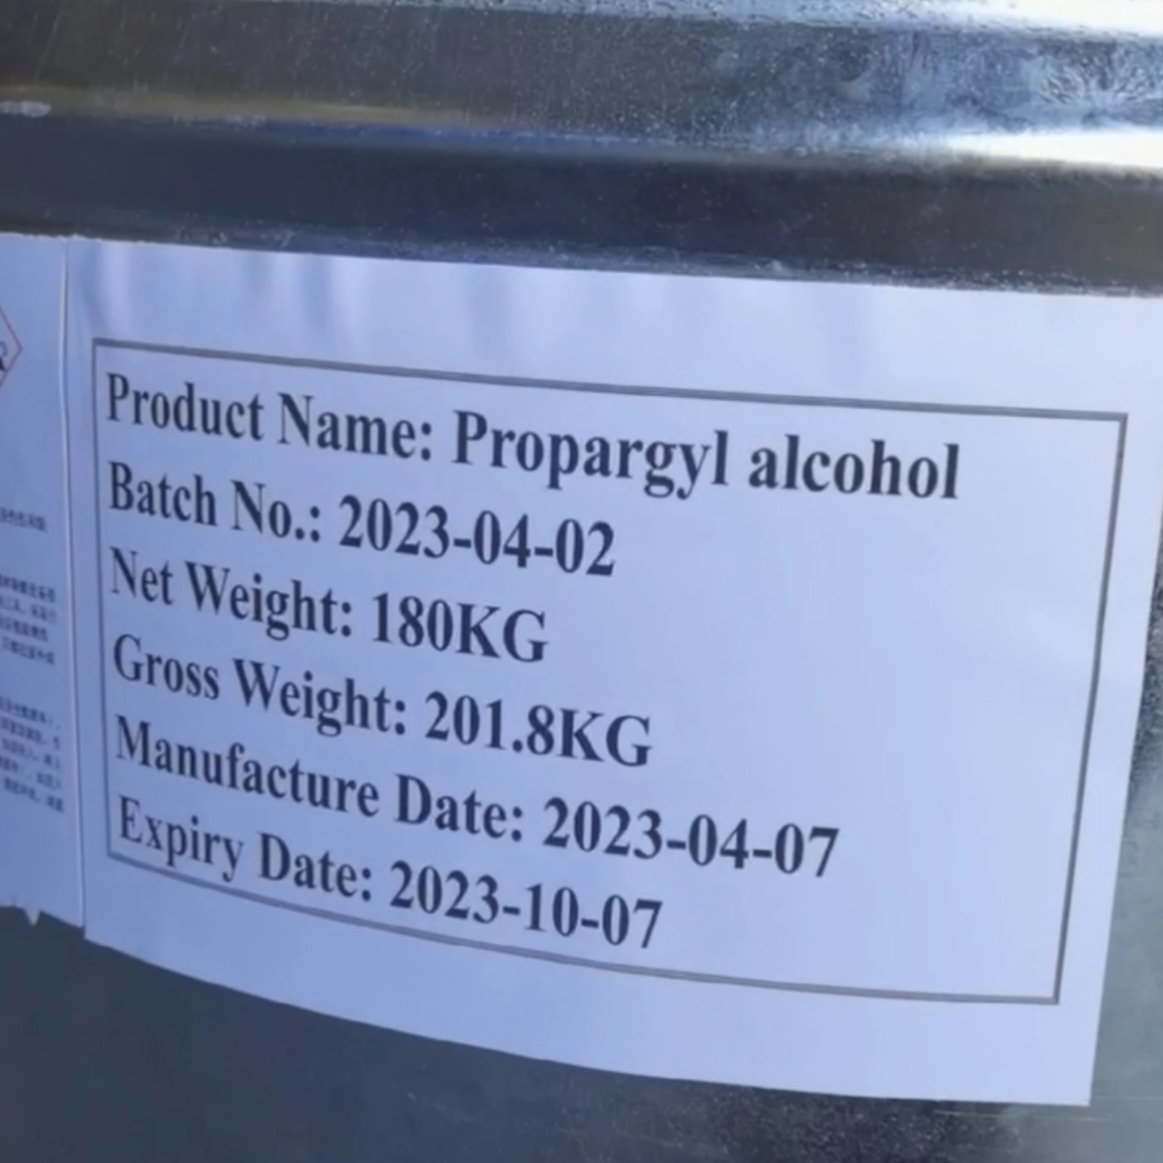 What Is Propargyl Alcohol？